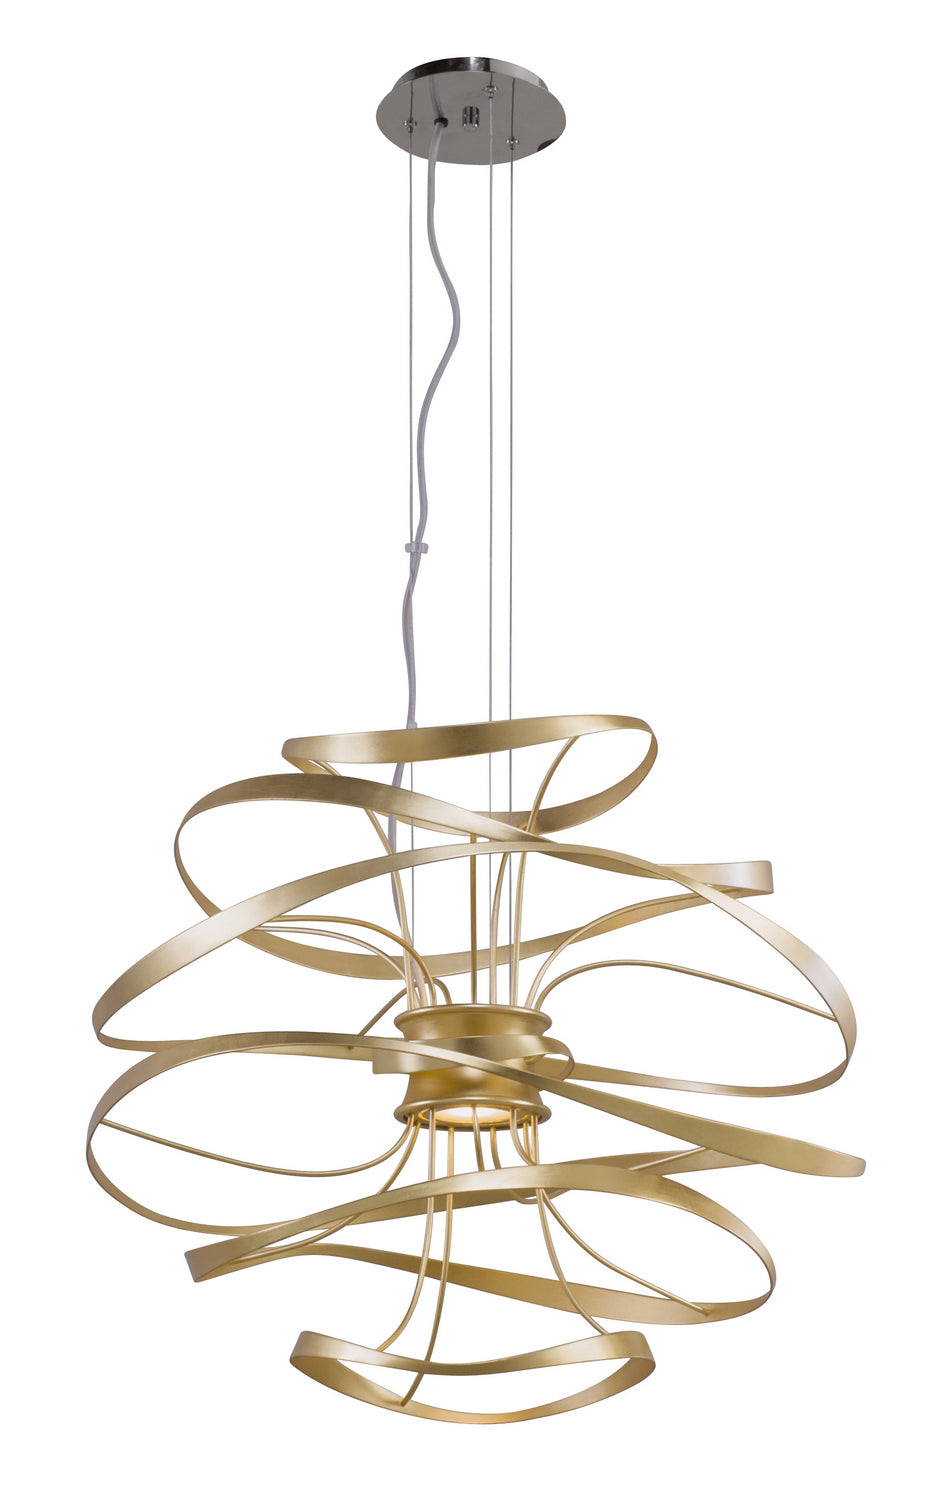 Corbett Lighting - 216-42-GL/SS - LED Chandelier - Calligraphy - Gold Leaf W Polished Stainless